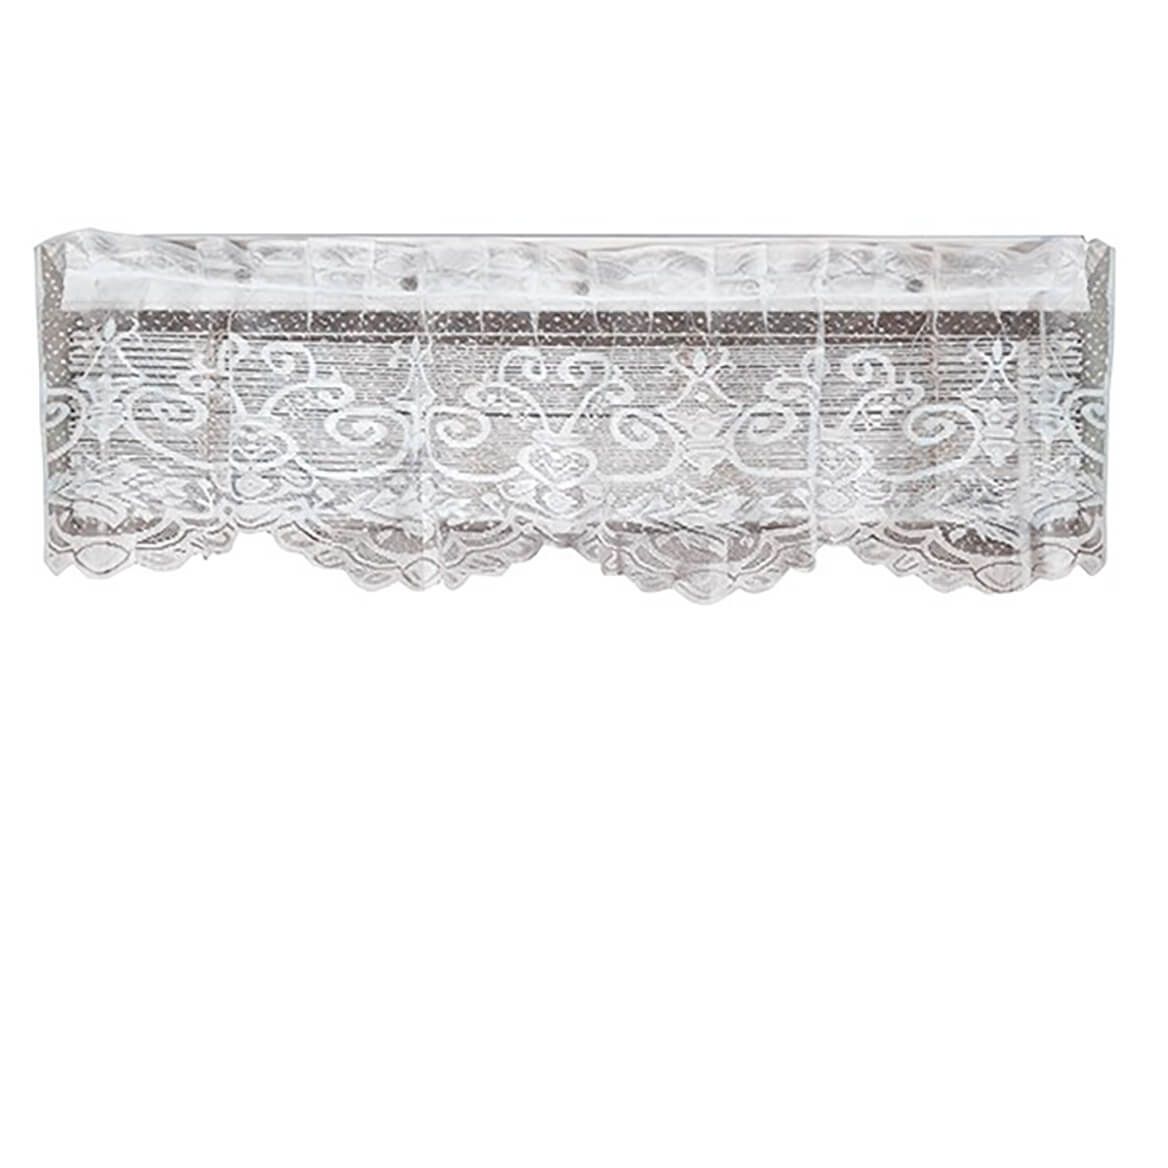 Magnetic Floral Lace Valance + '-' + 352254